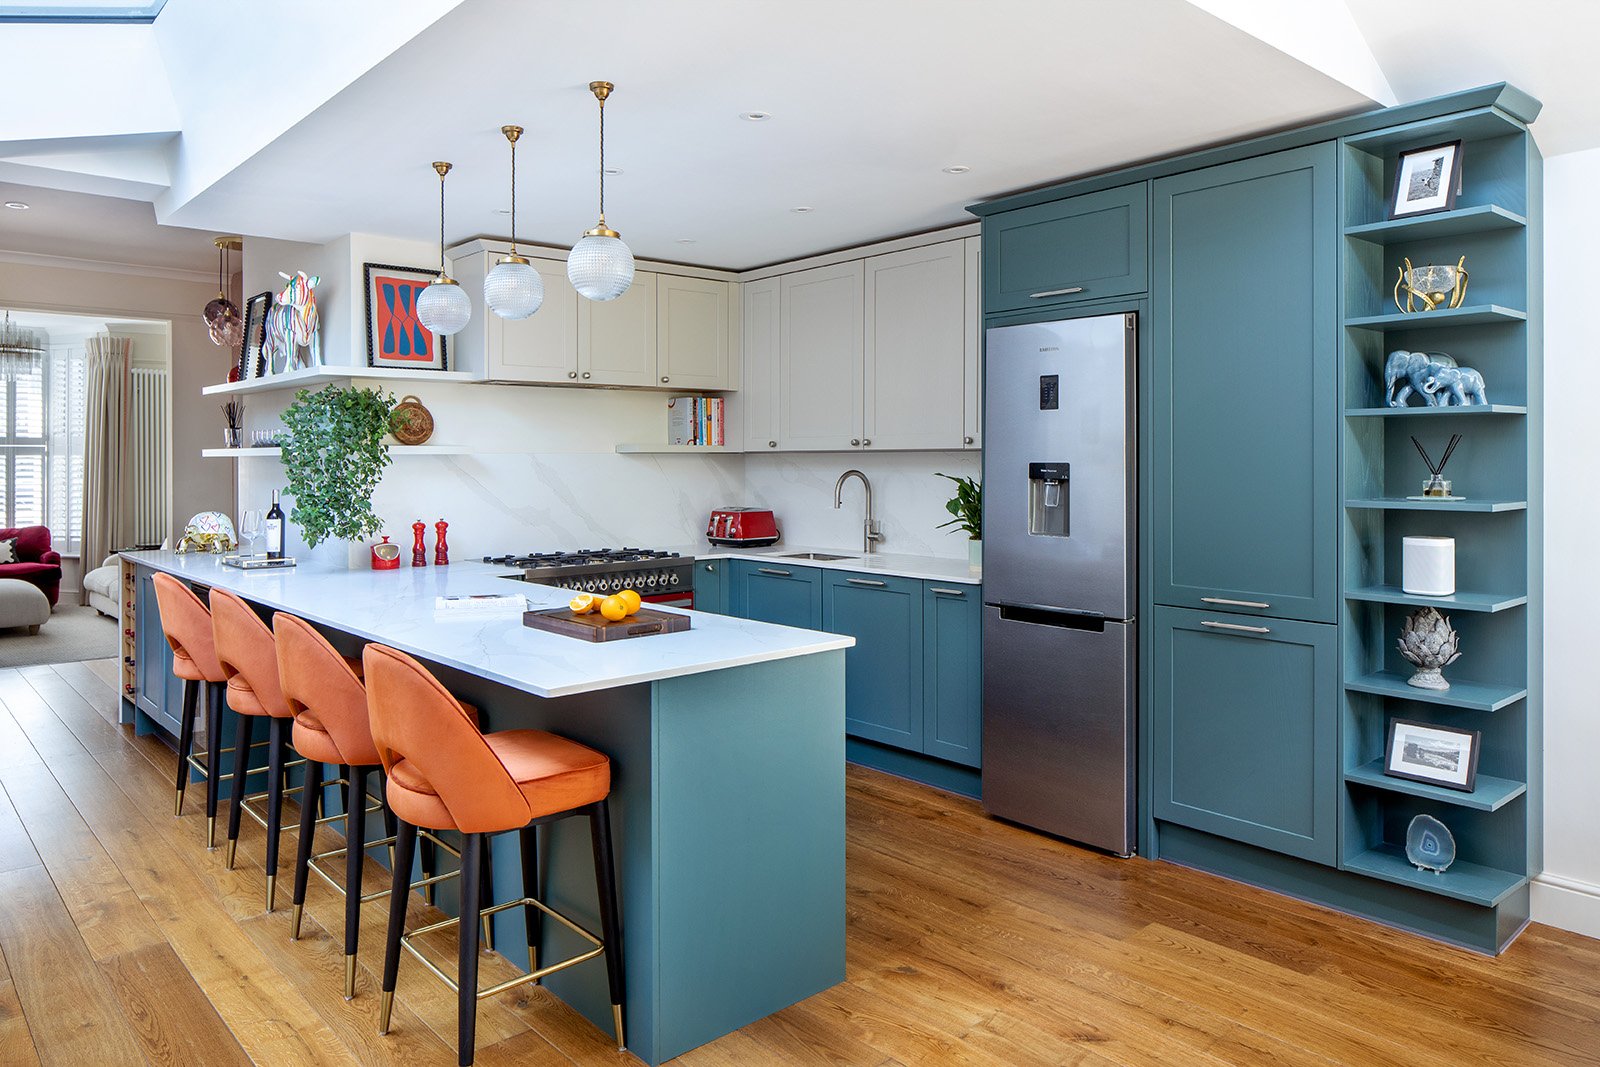 What Are The 4 Basic Kitchen Designs? – The Home Answer